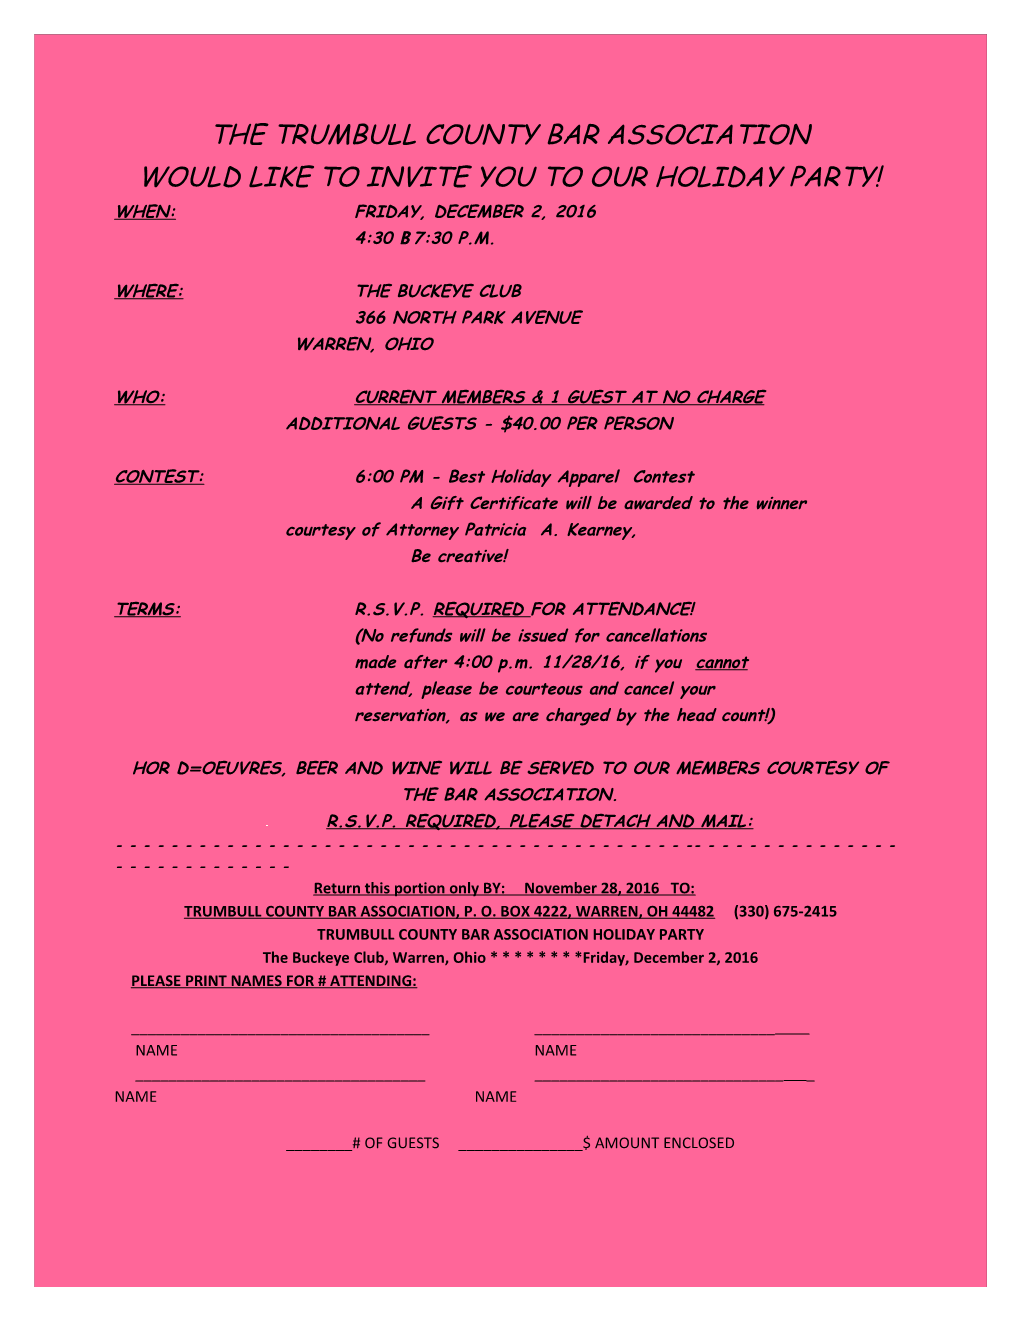 Would Like to Invite You to Our Holiday Party!